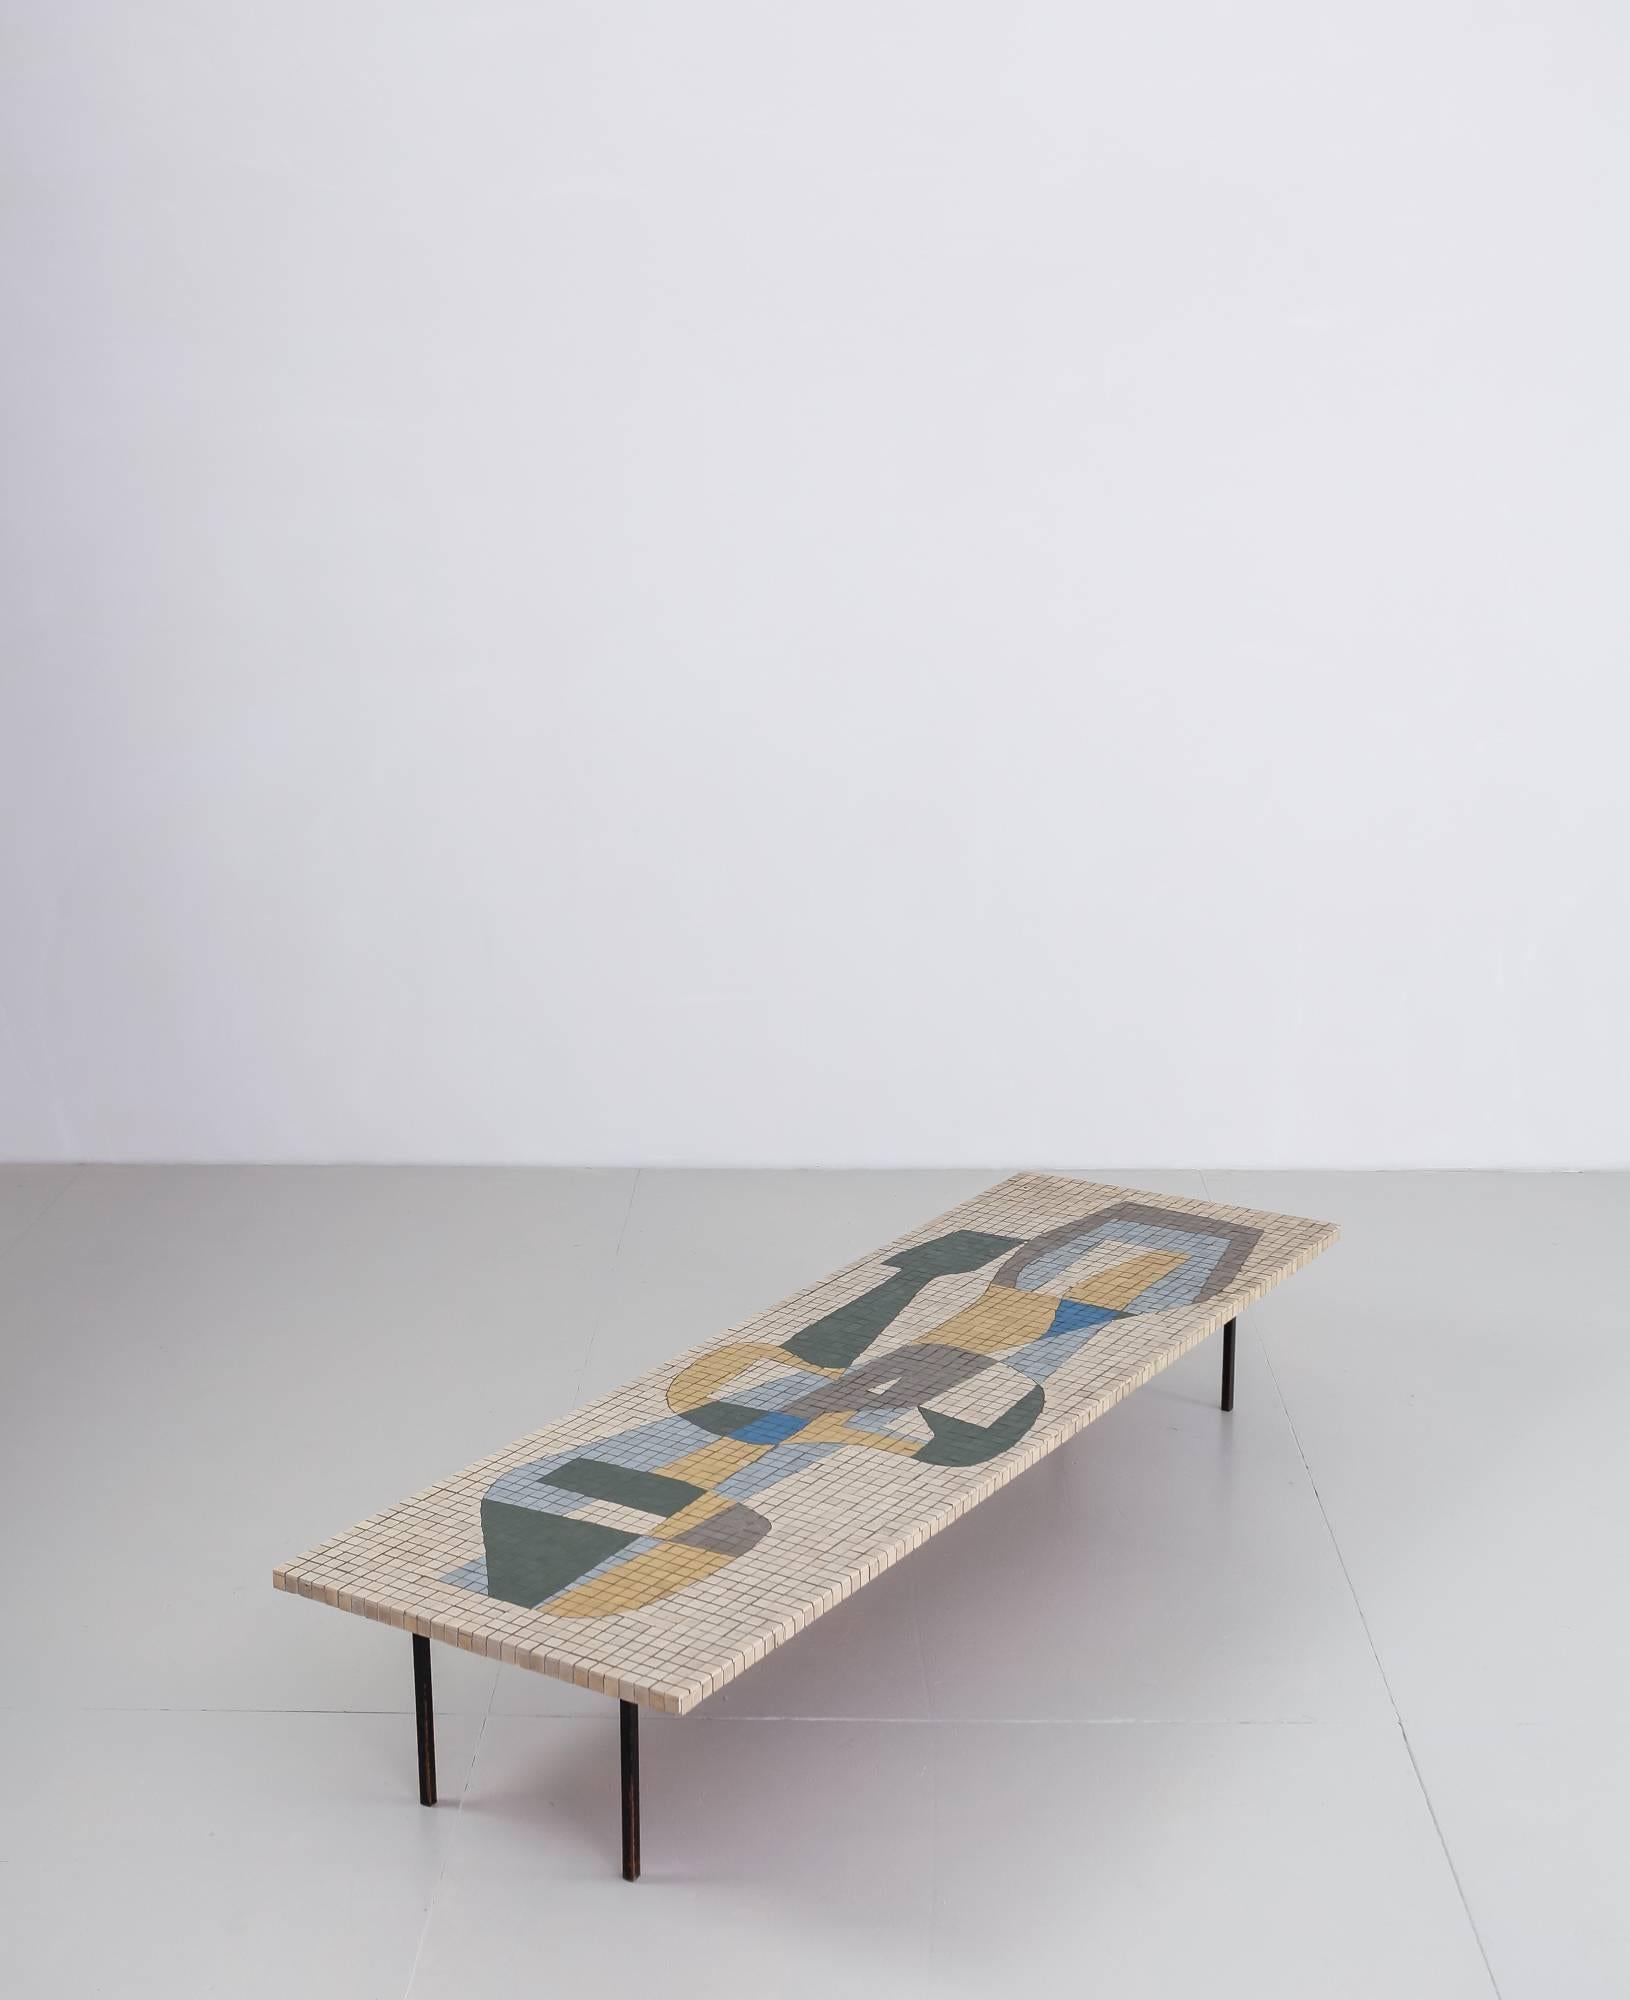 A long, rectangular coffee table with an abstract, Mid-Century Modernist mosaic tile composition, on a black lacquered metal frame. The edges of the top have tiles all around.